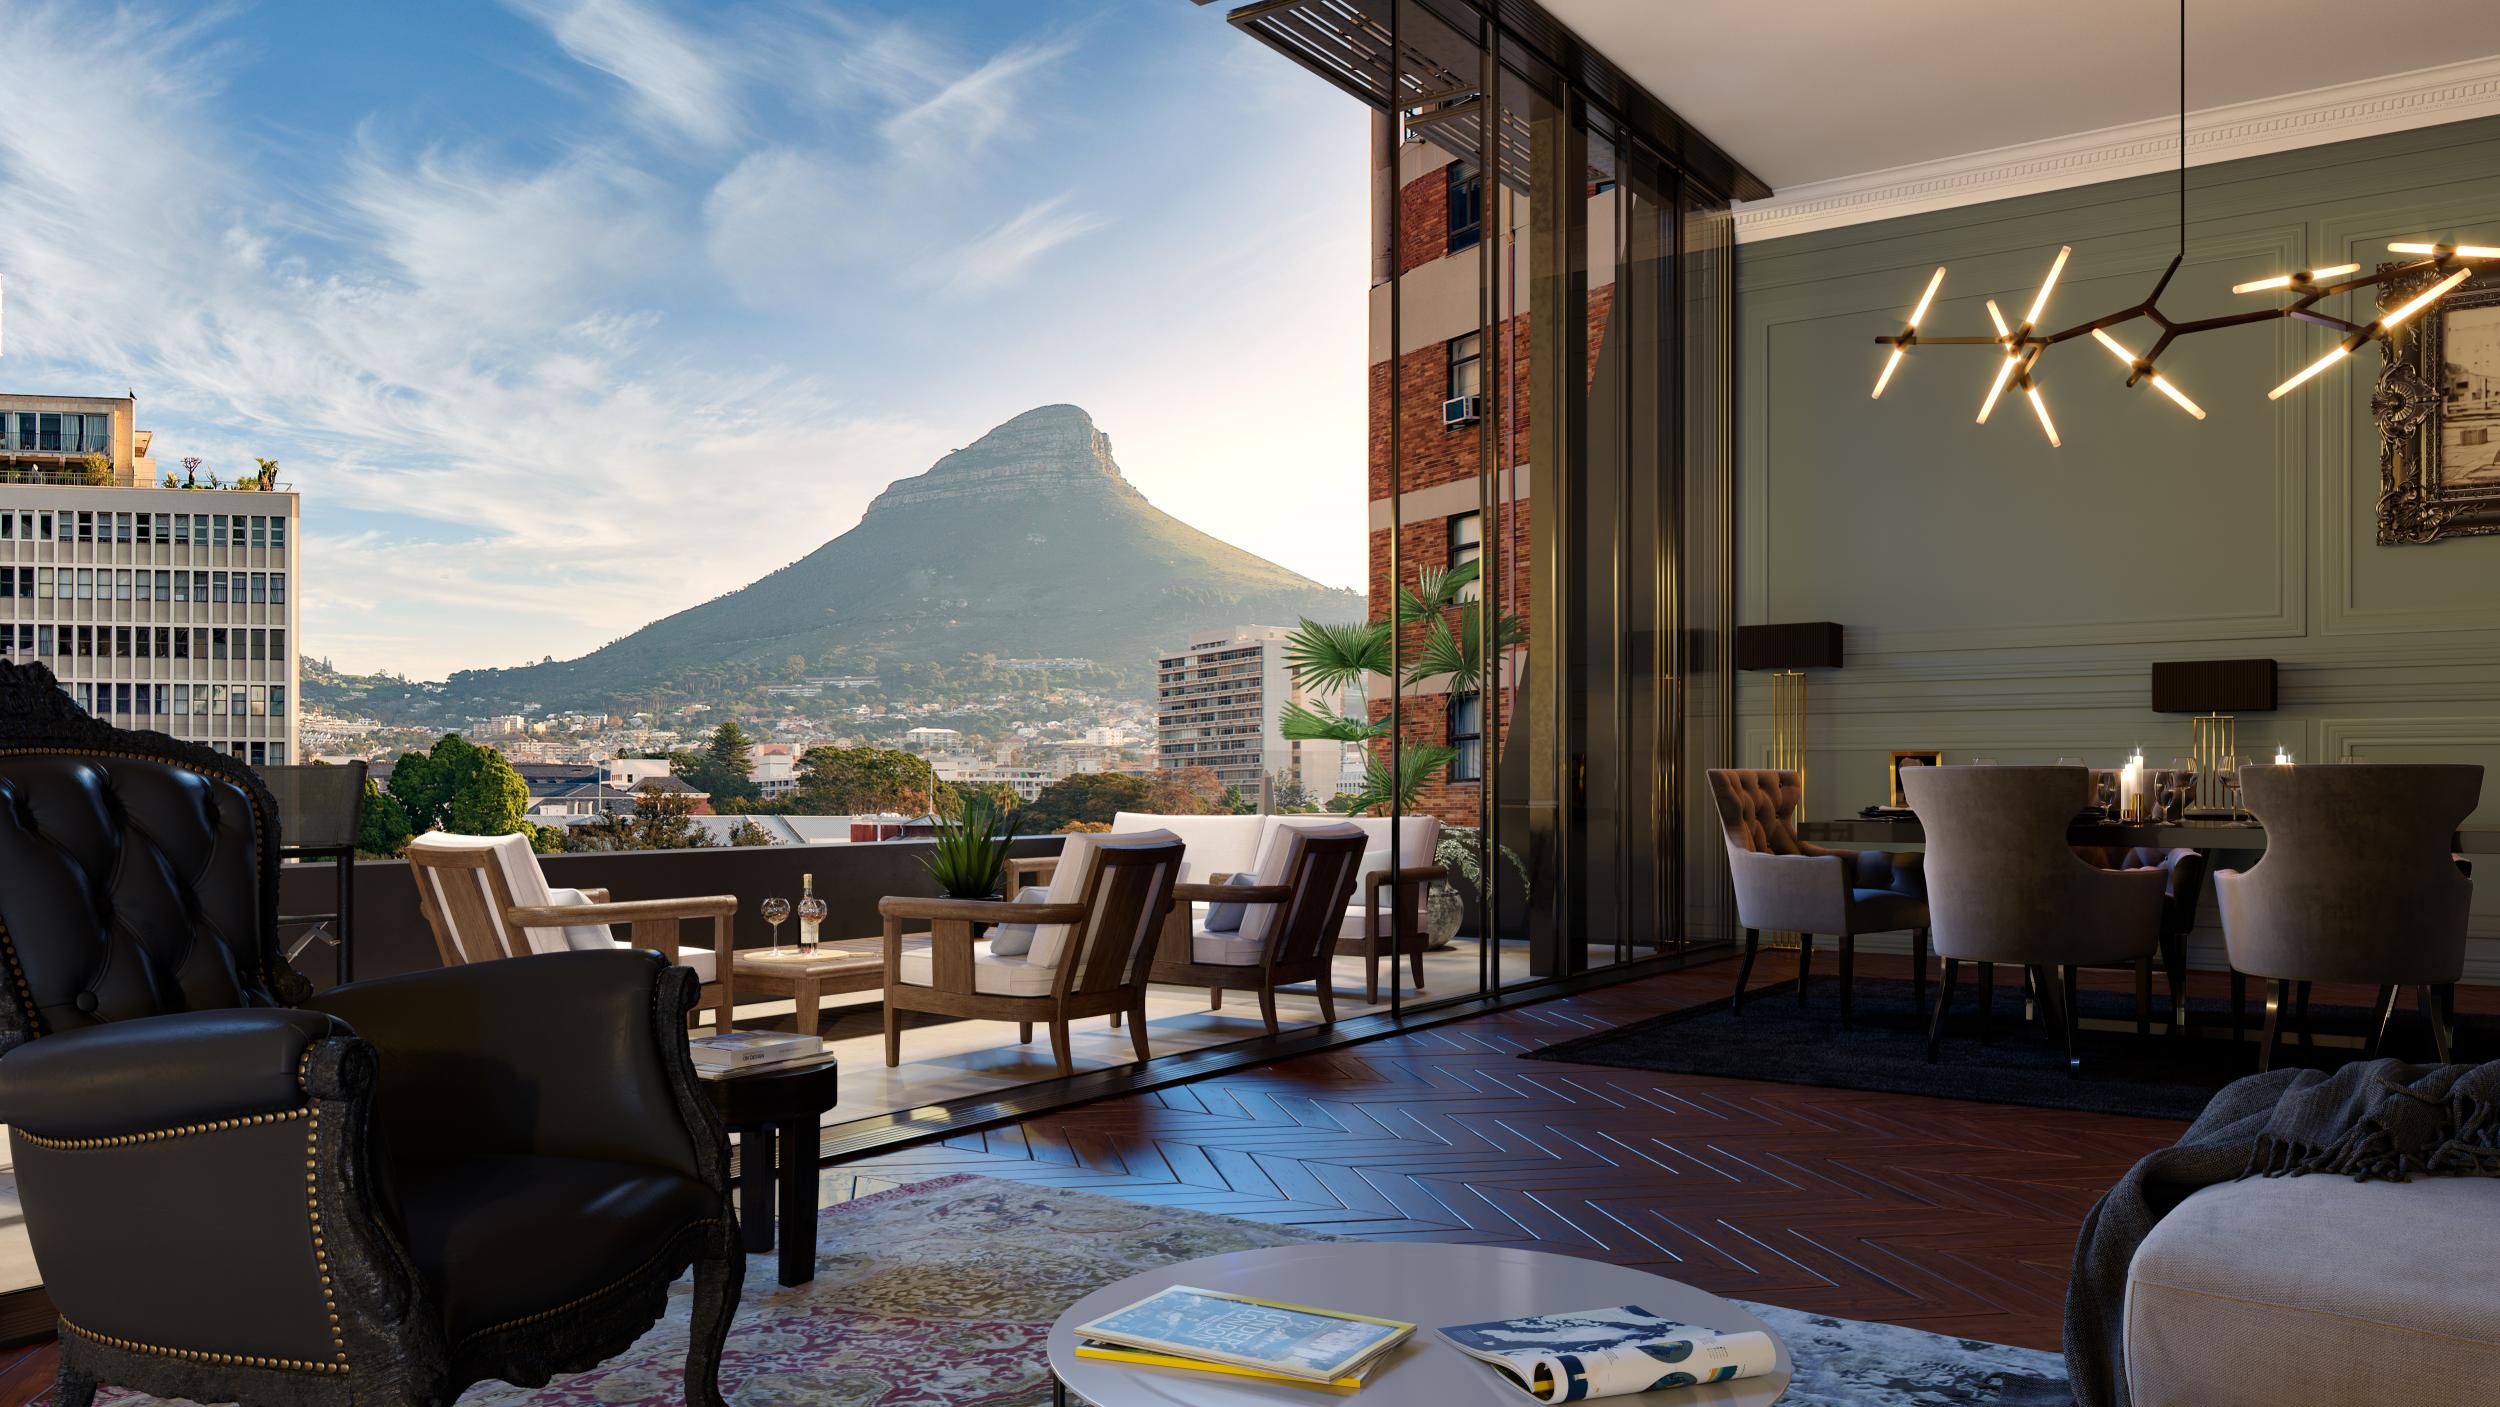 Labotessa offers sweeping Table Mountain views